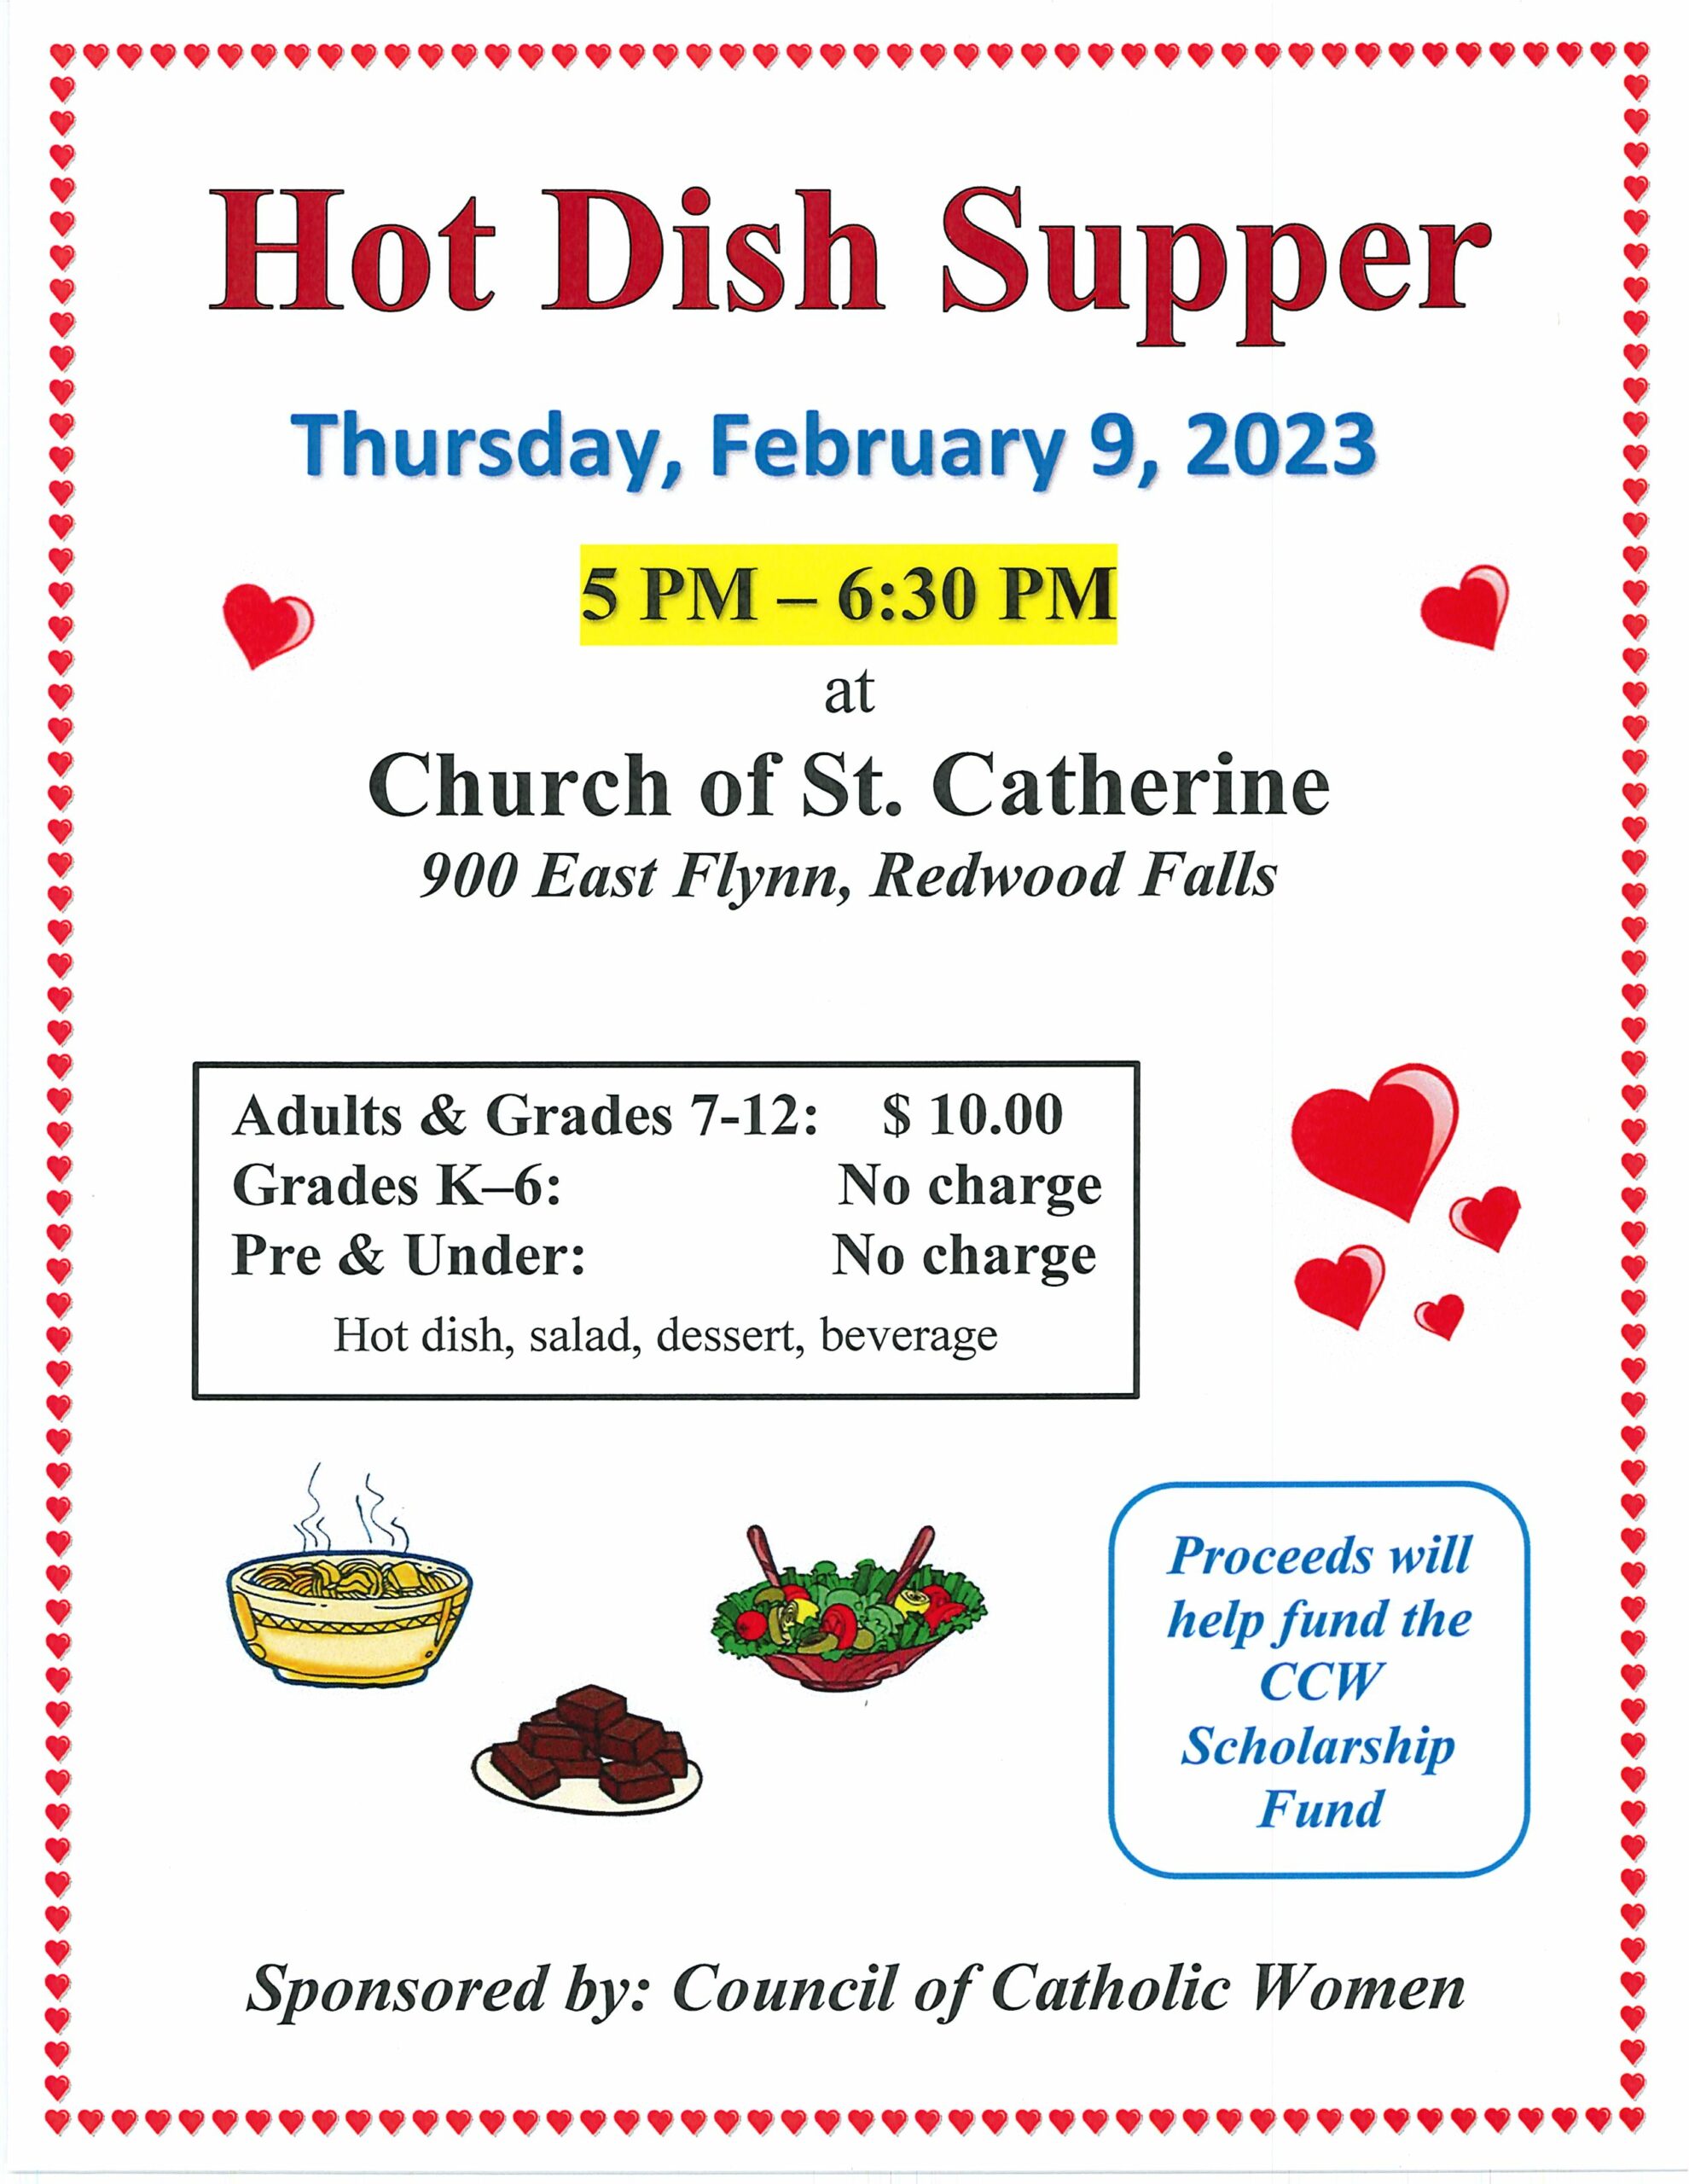 <h1 class="tribe-events-single-event-title">Hot dish supper</h1>